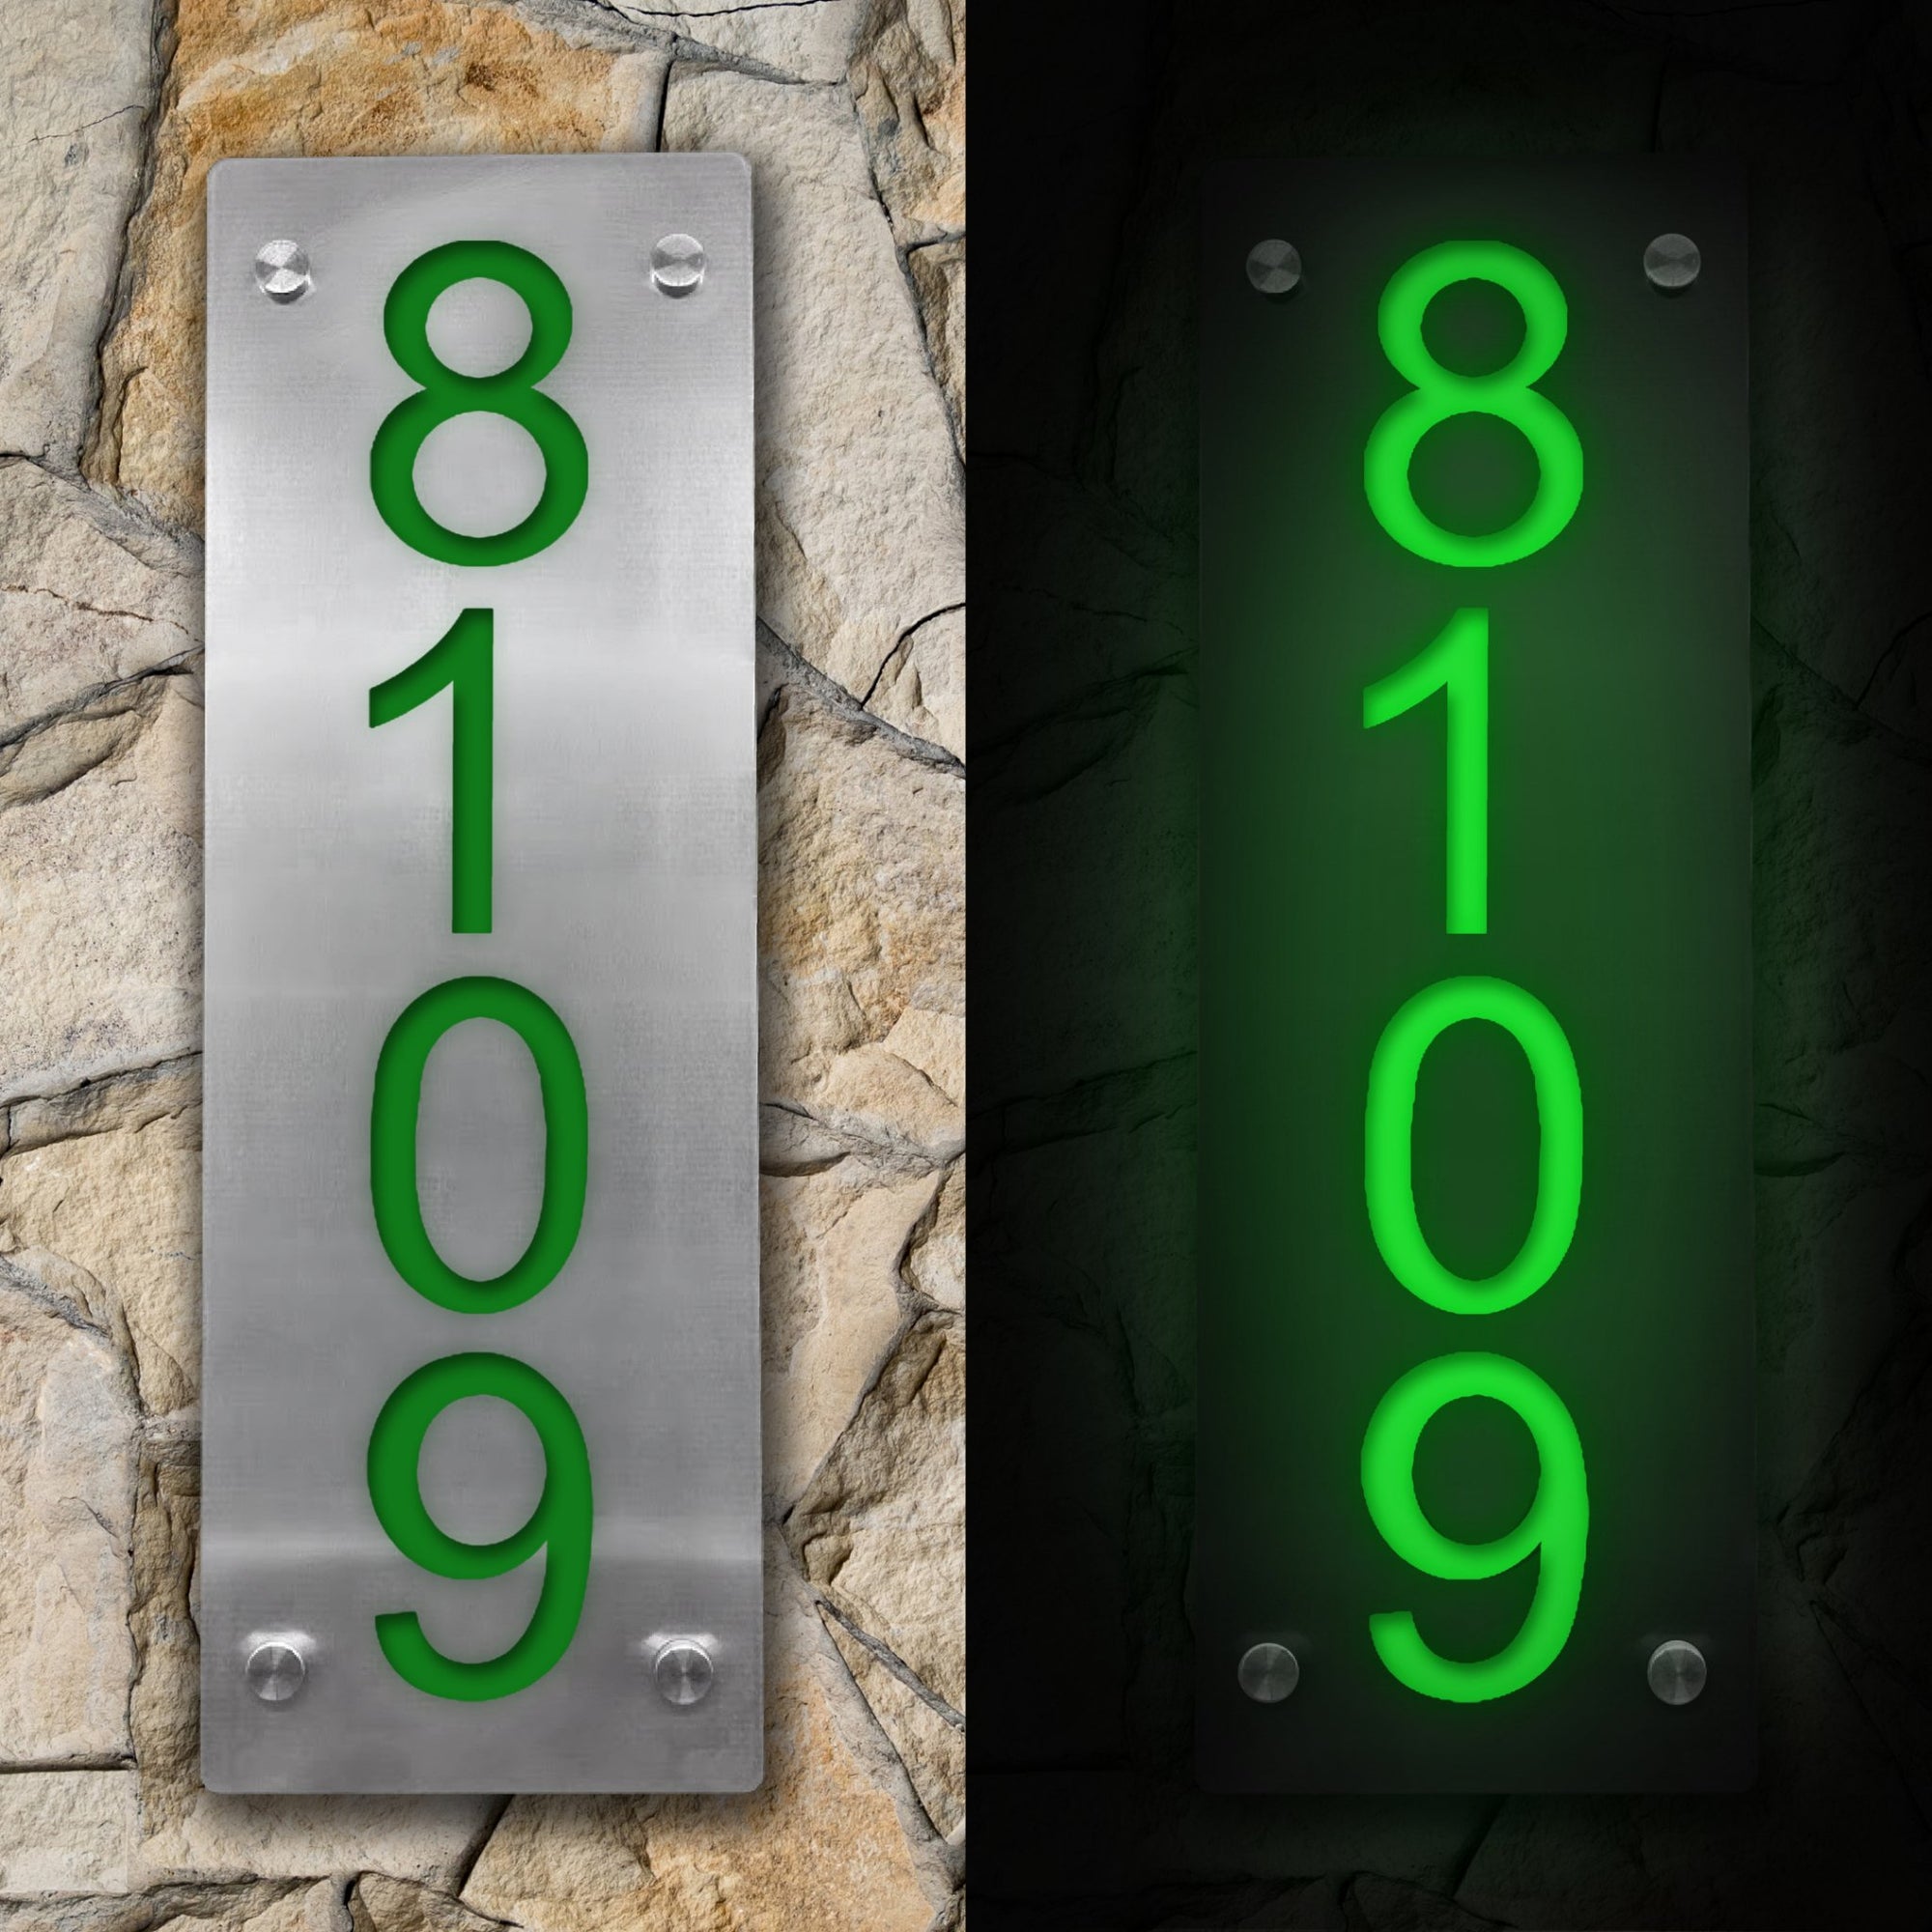 Vertical illuminated house address number in green color, featuring solar and electric power options. Energy-efficient outdoor sign for easy identification of your home.